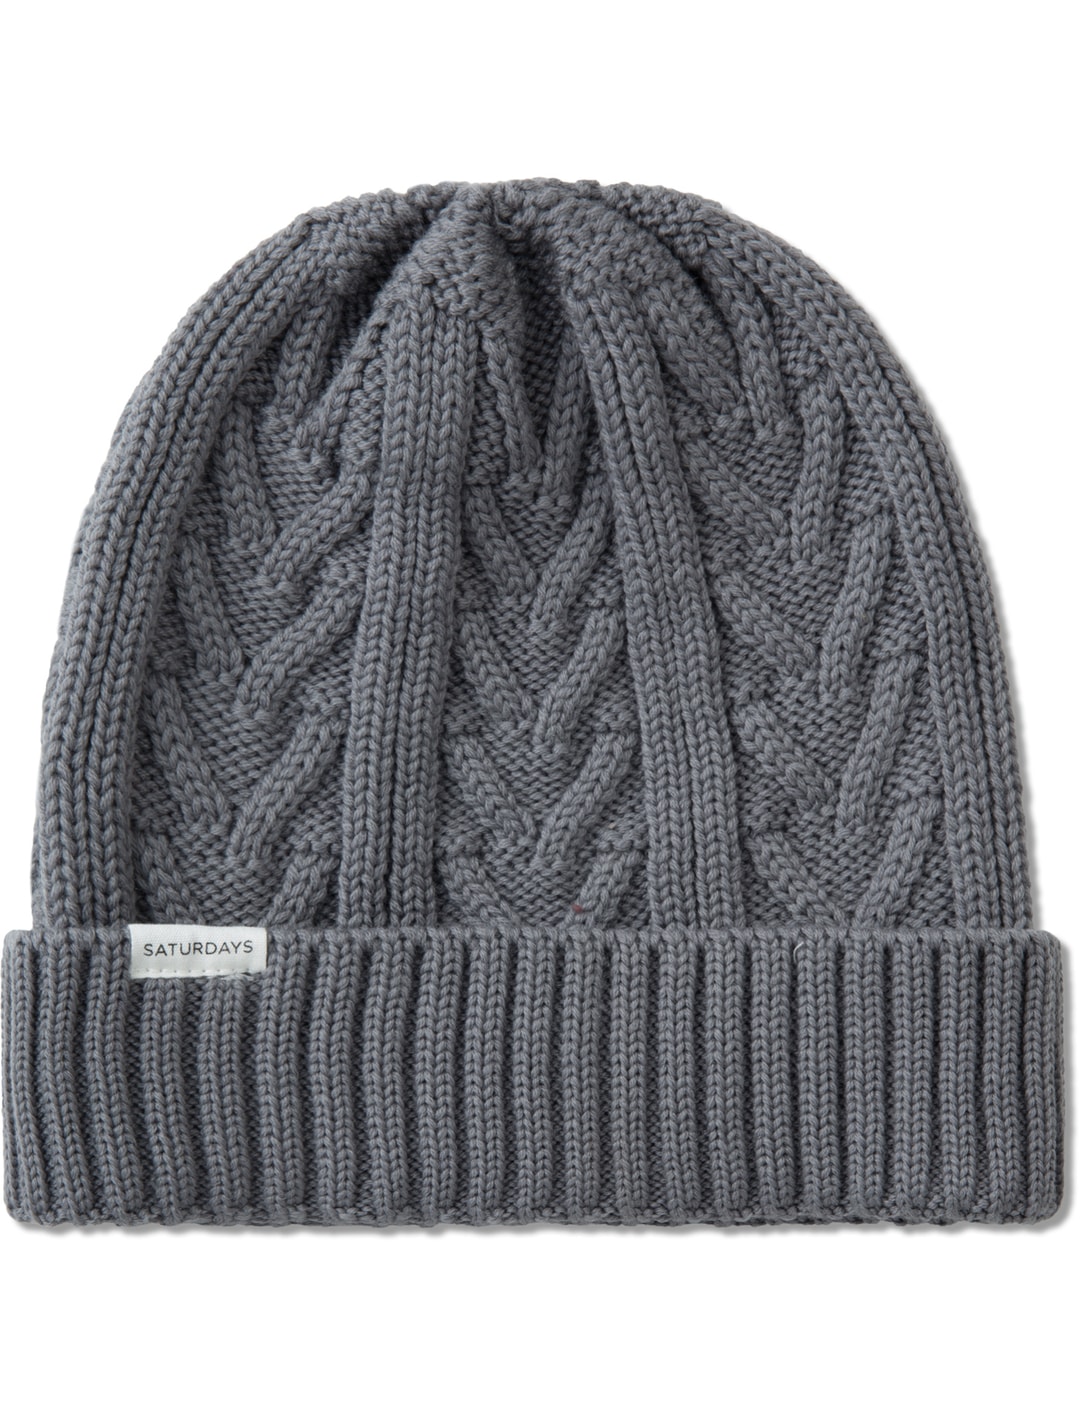 Saturdays Nyc - Grey Cable Beanie | HBX - Globally Curated Fashion and ...